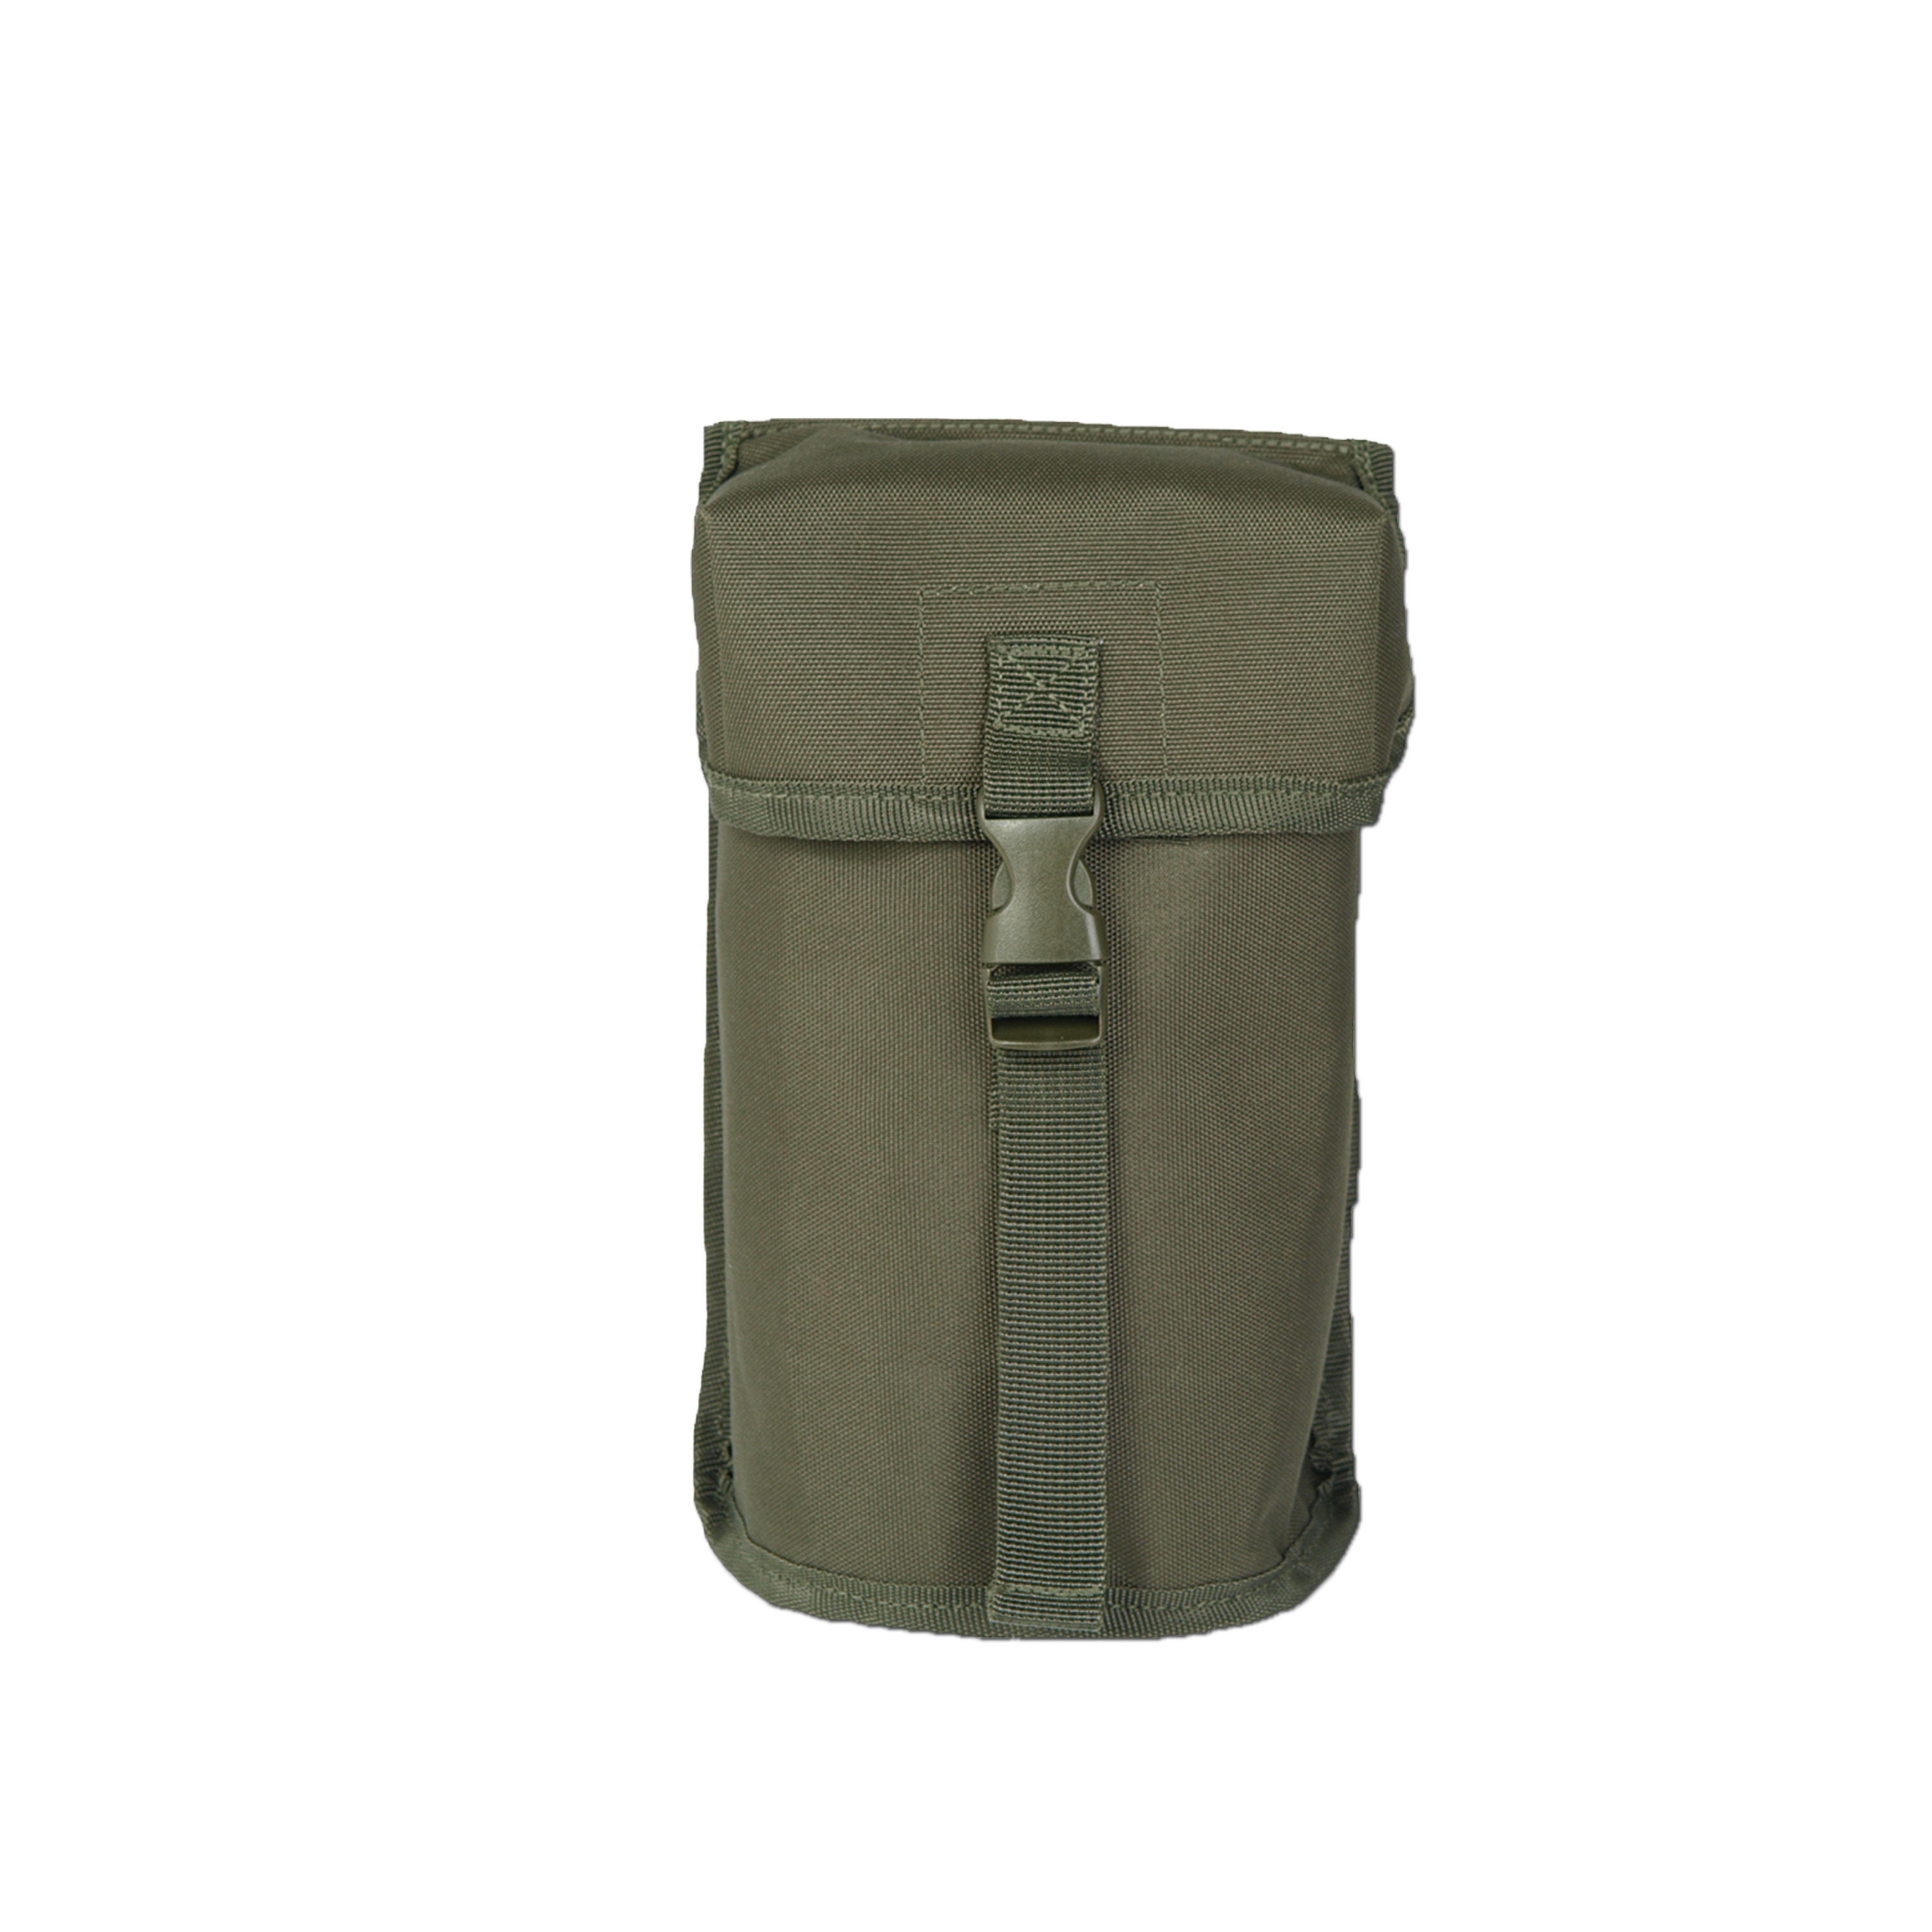 Mil-Tec Canteen Pouch British Style olive, Mil-Tec Canteen Pouch British  Style olive, Accessories, Outdoor Dishes, Outdoor Kitchen